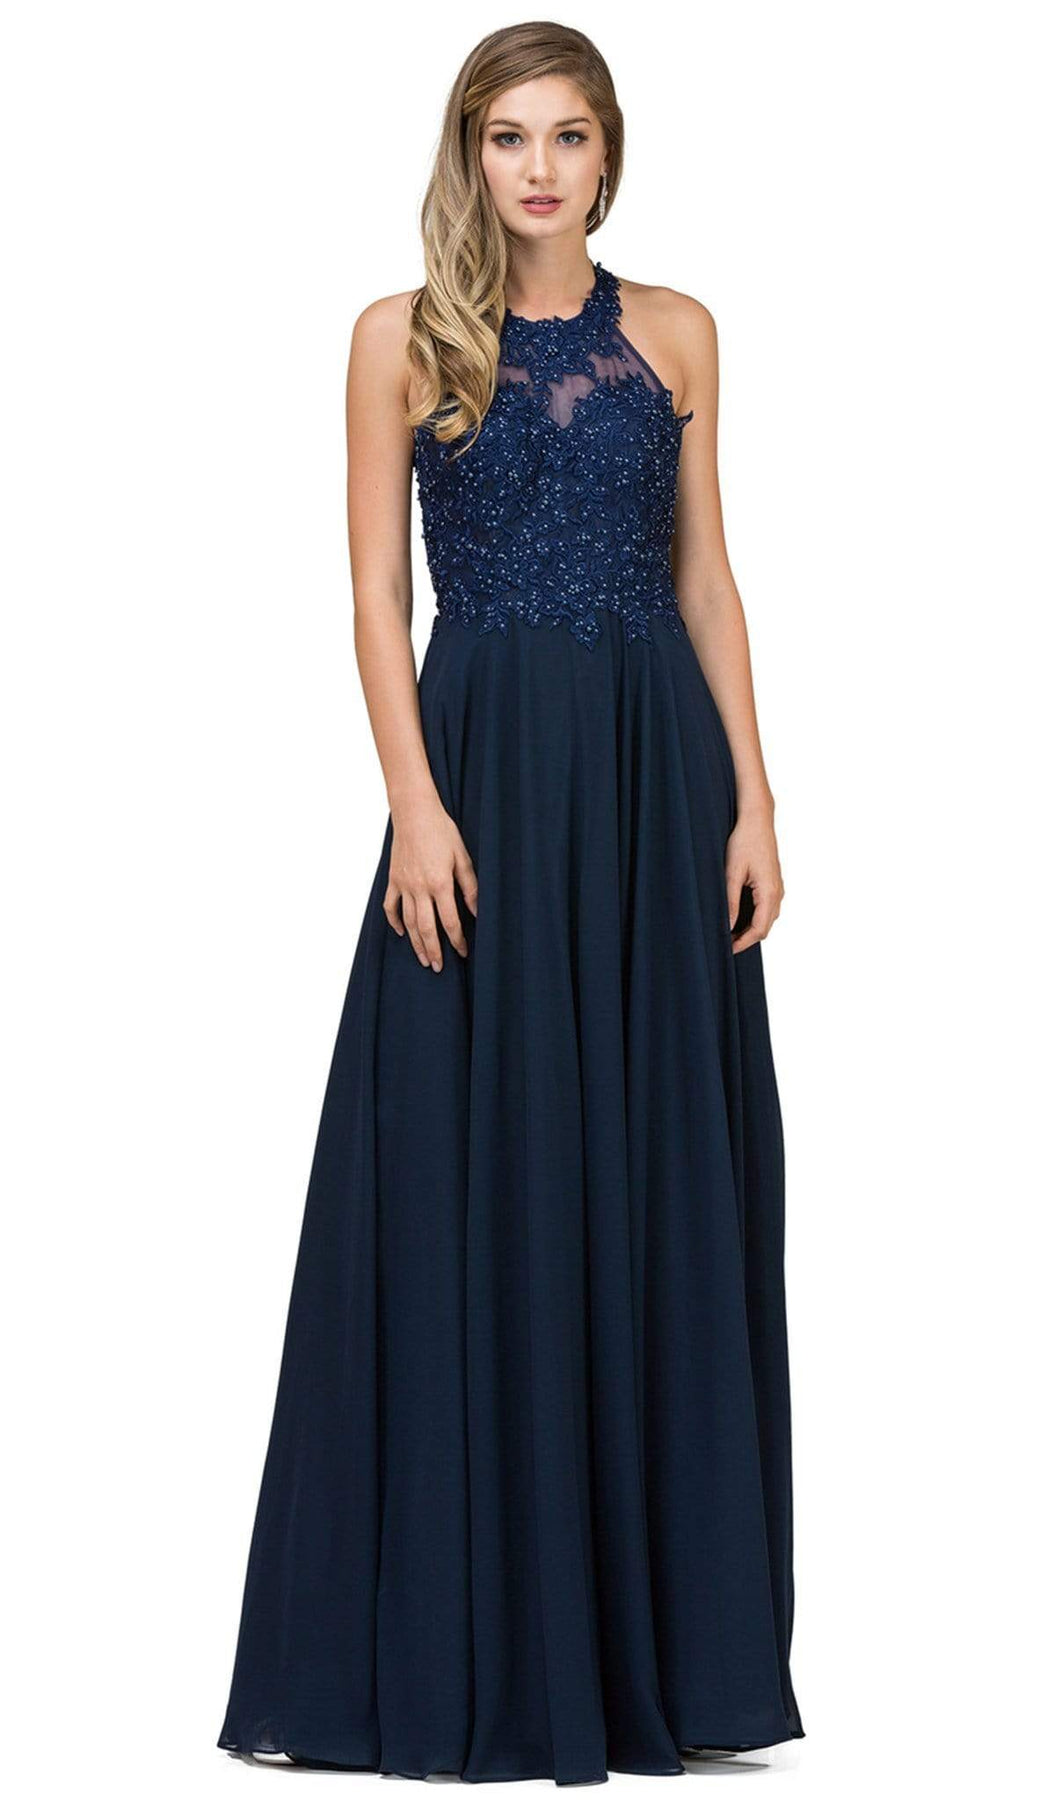 Dancing Queen - 2017 Beaded Lace Halter Prom Dress With Open Back Bridesmaid Dresses XS / Navy